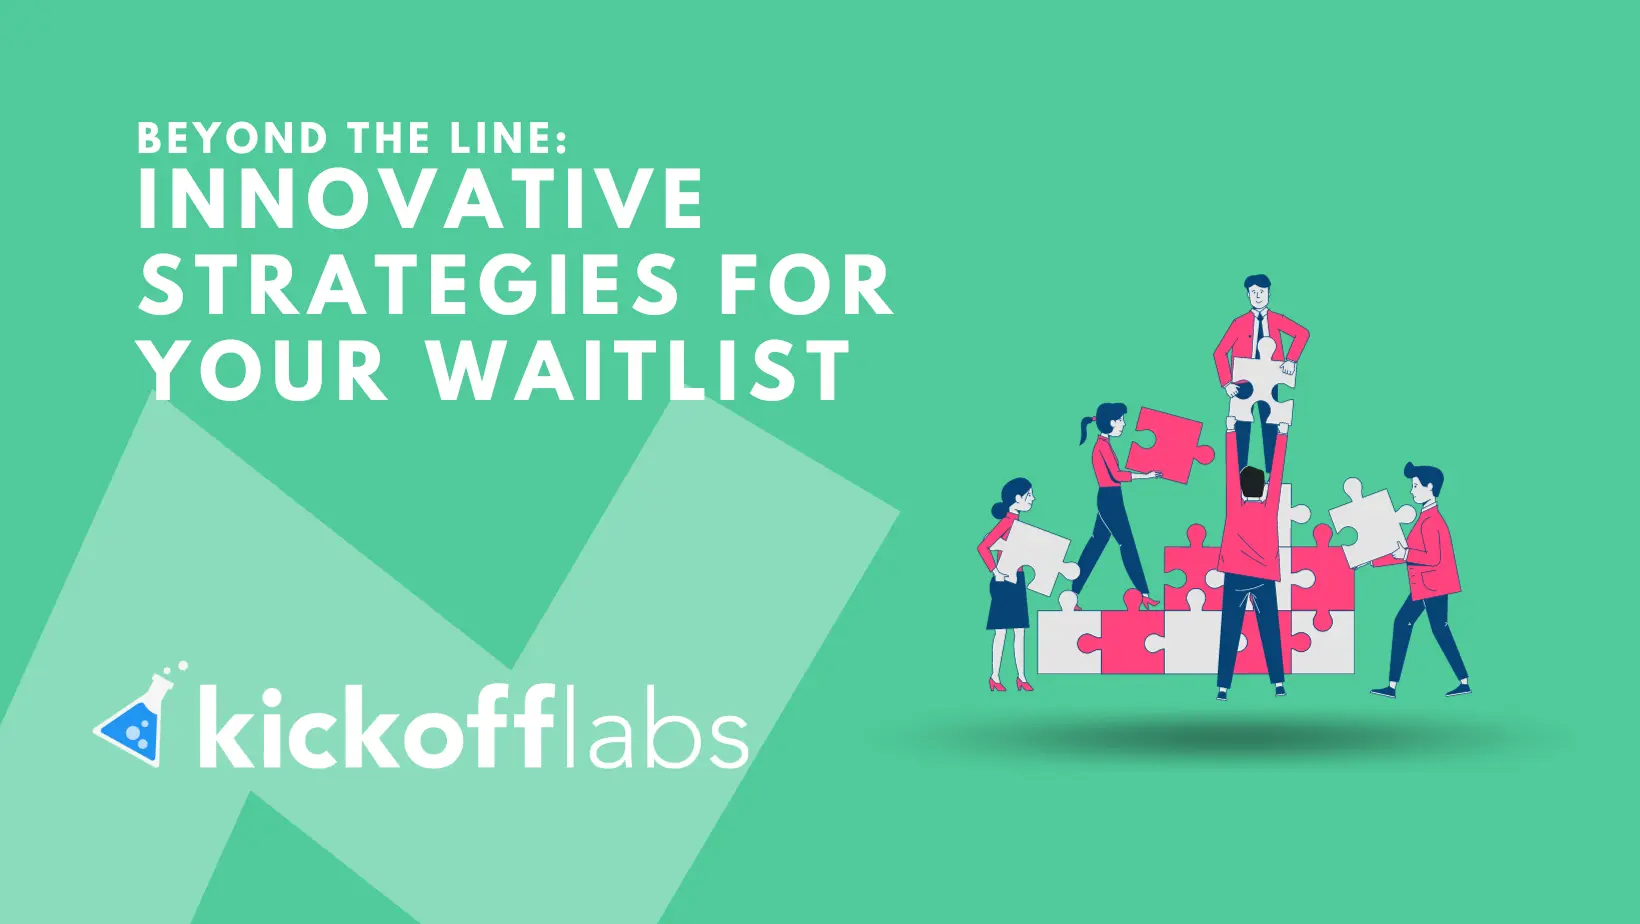 Beyond the Line - Innovative Strategies for Your Waitlist